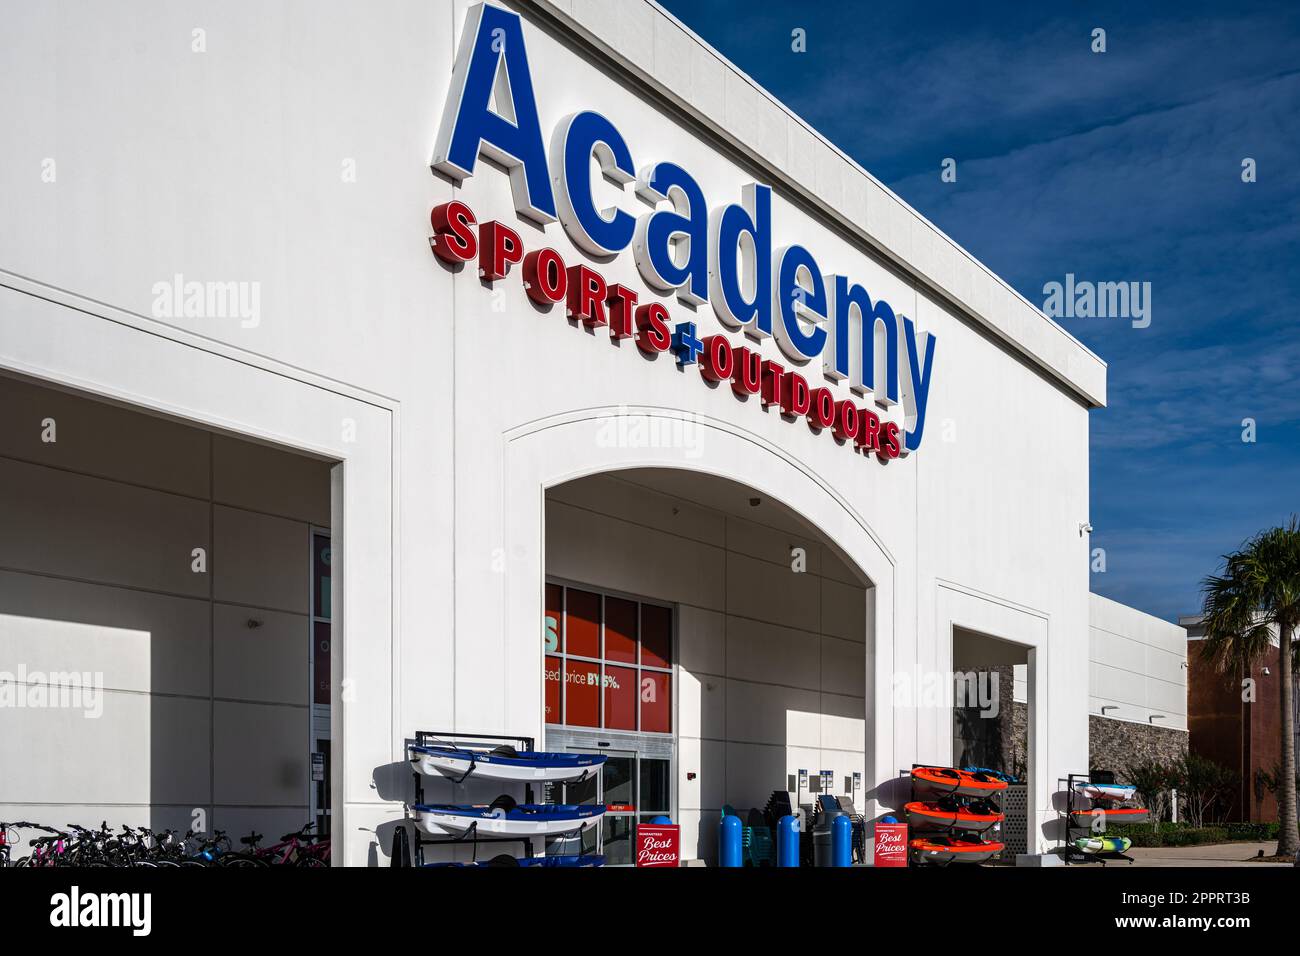 ACADEMY SPORTS + OUTDOORS - 33 Photos & 35 Reviews - 21351 Gulf